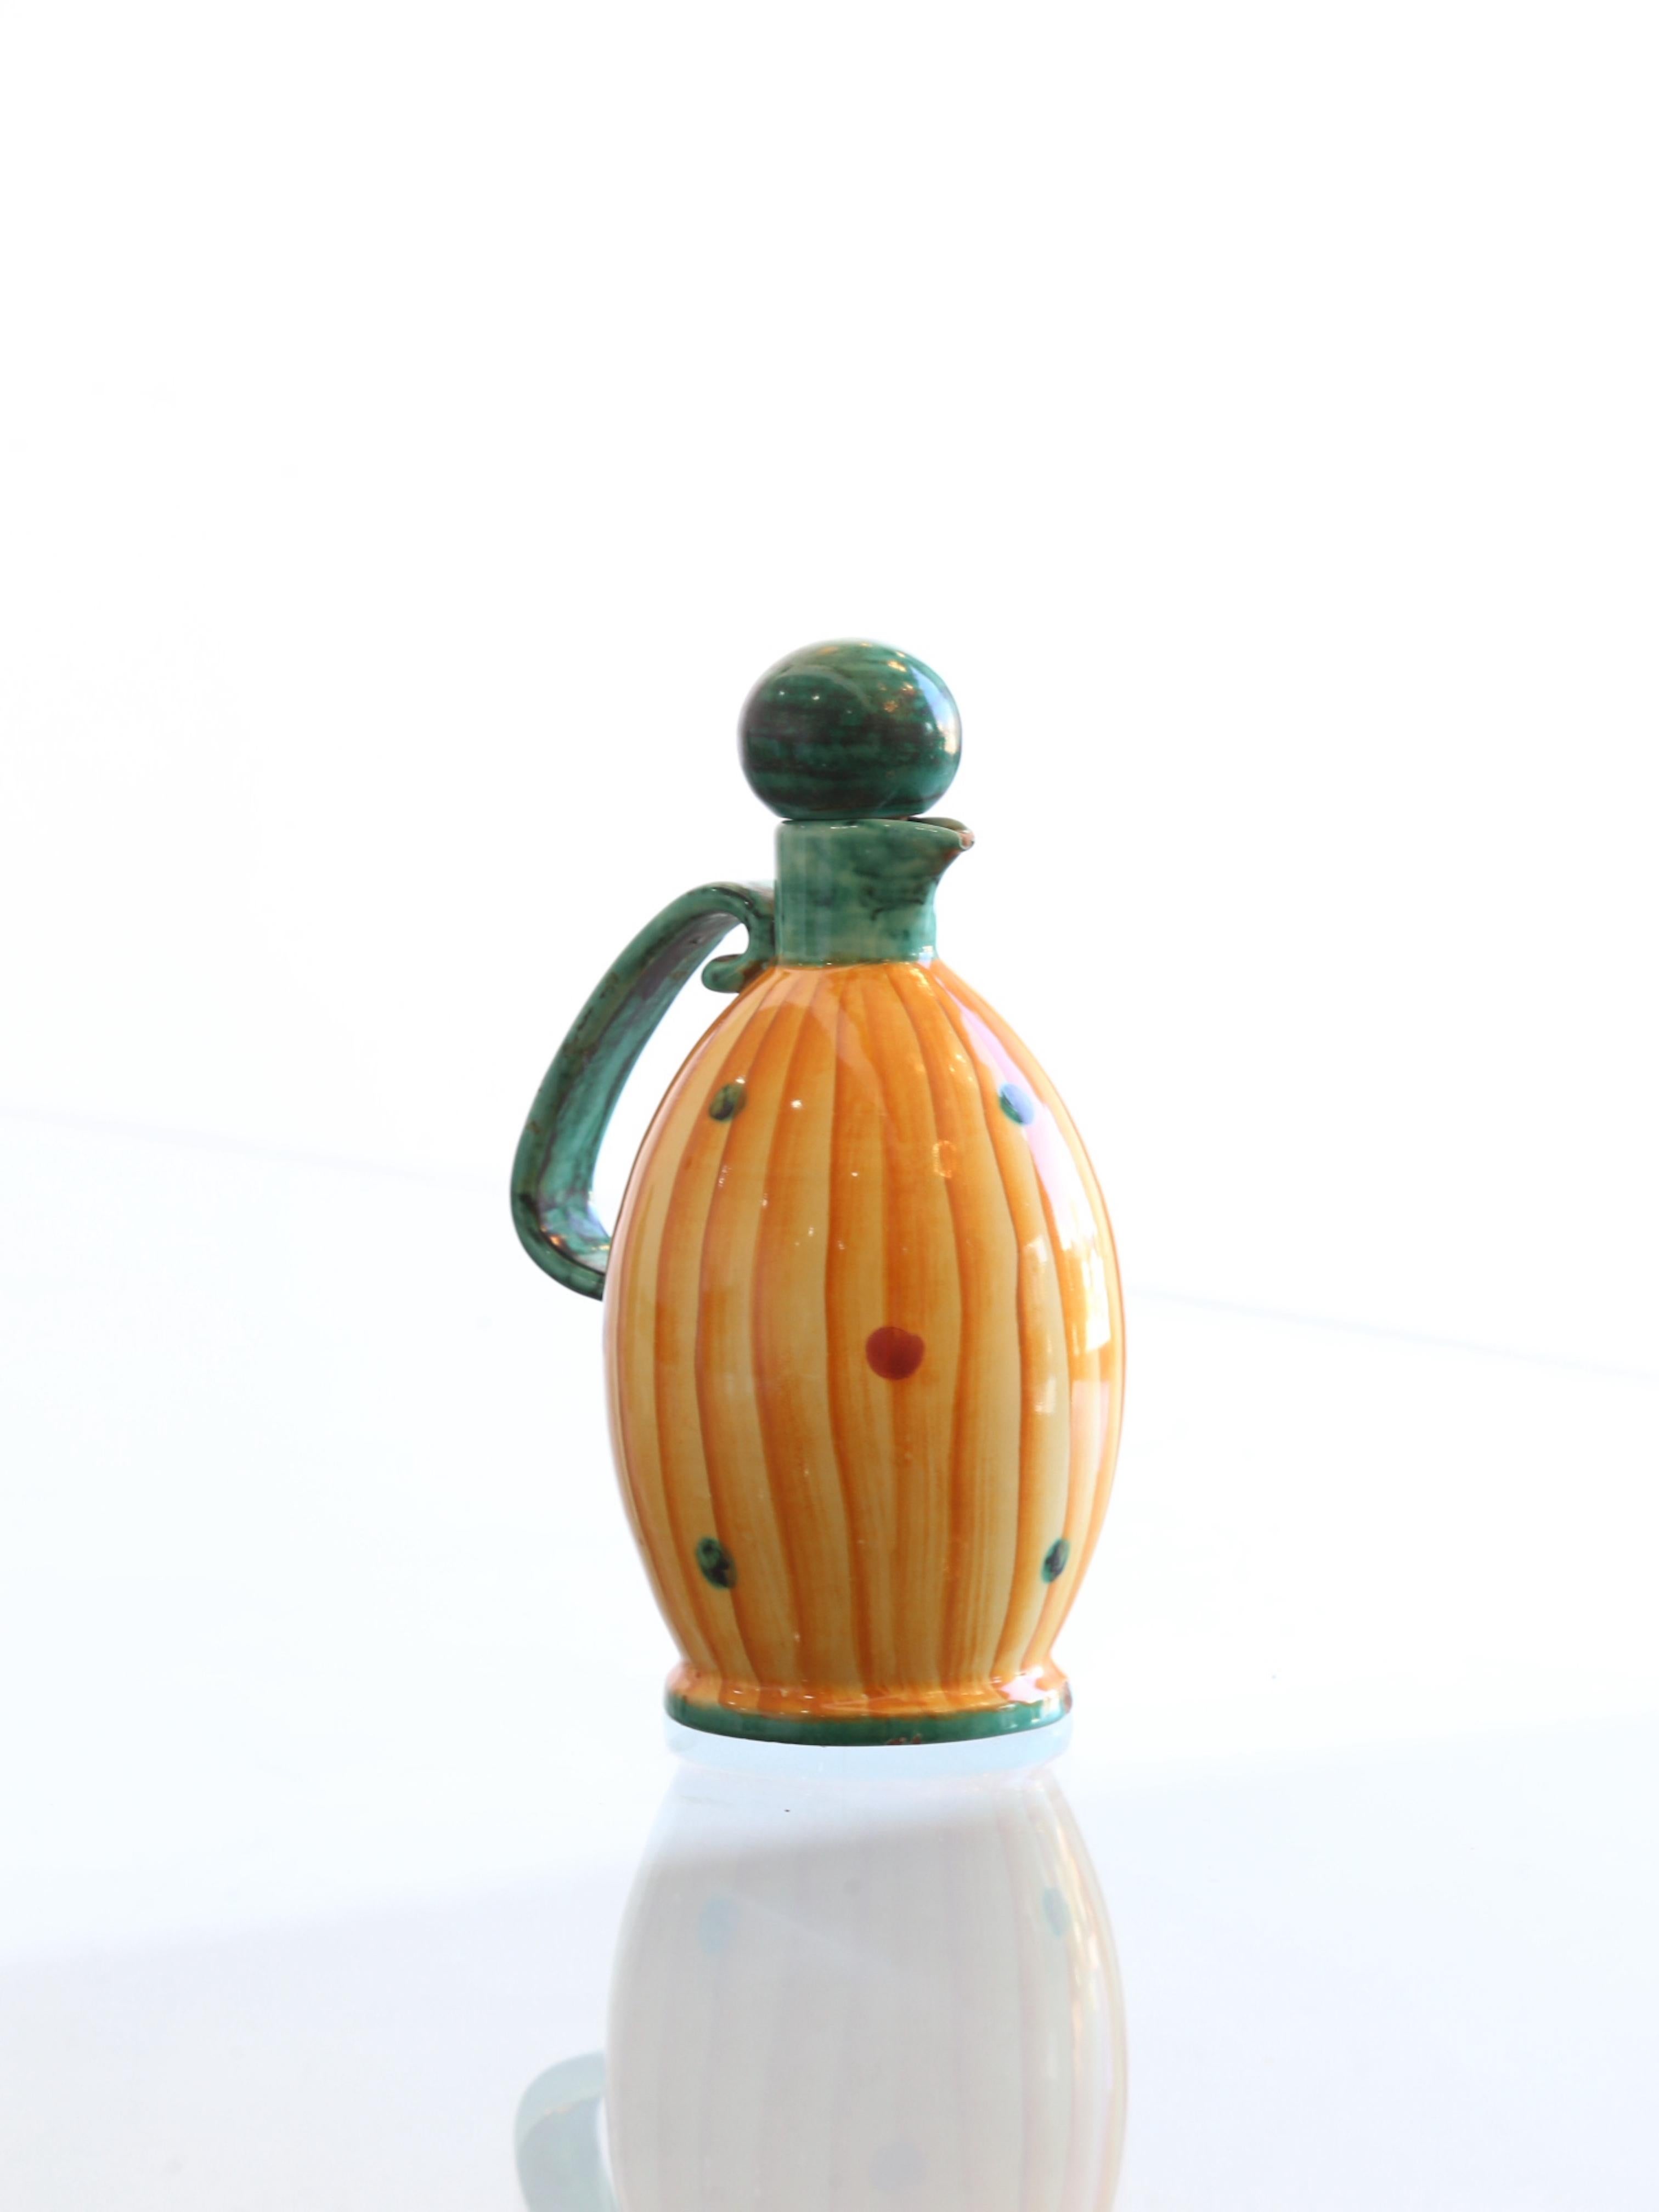 Pucci Umbertide Hand Painted Olive Oil Ceramic Bottle, 1950s For Sale 4